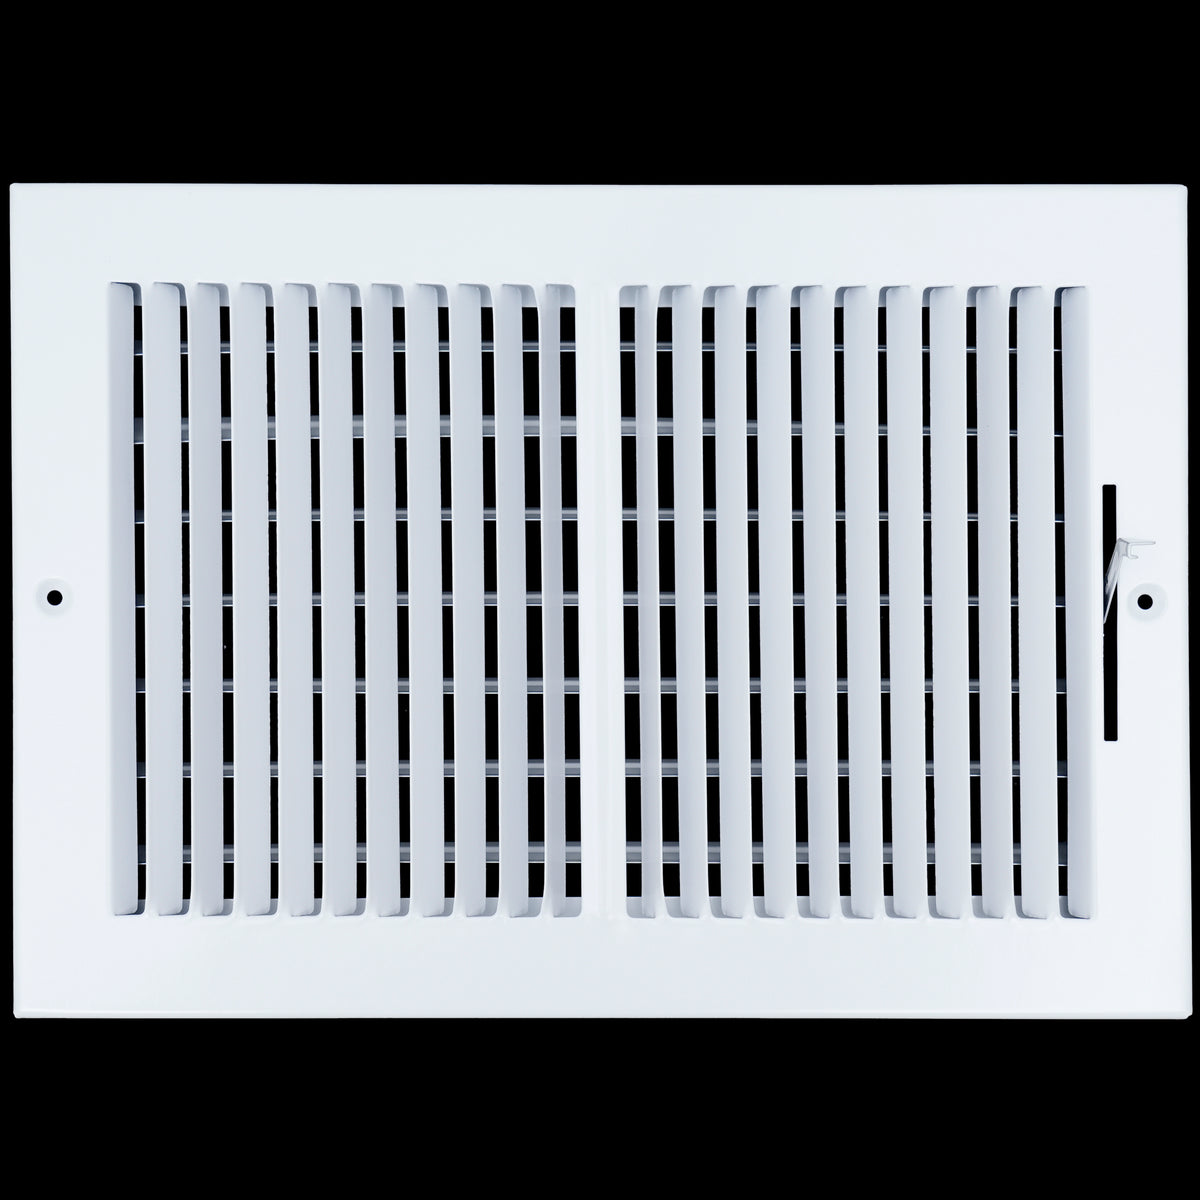 airgrilles 12 x 8 duct opening  -  2 way steel air supply diffuser for sidewall and ceiling hnd-asg-wh-2way-12x8 764613097498 - 1